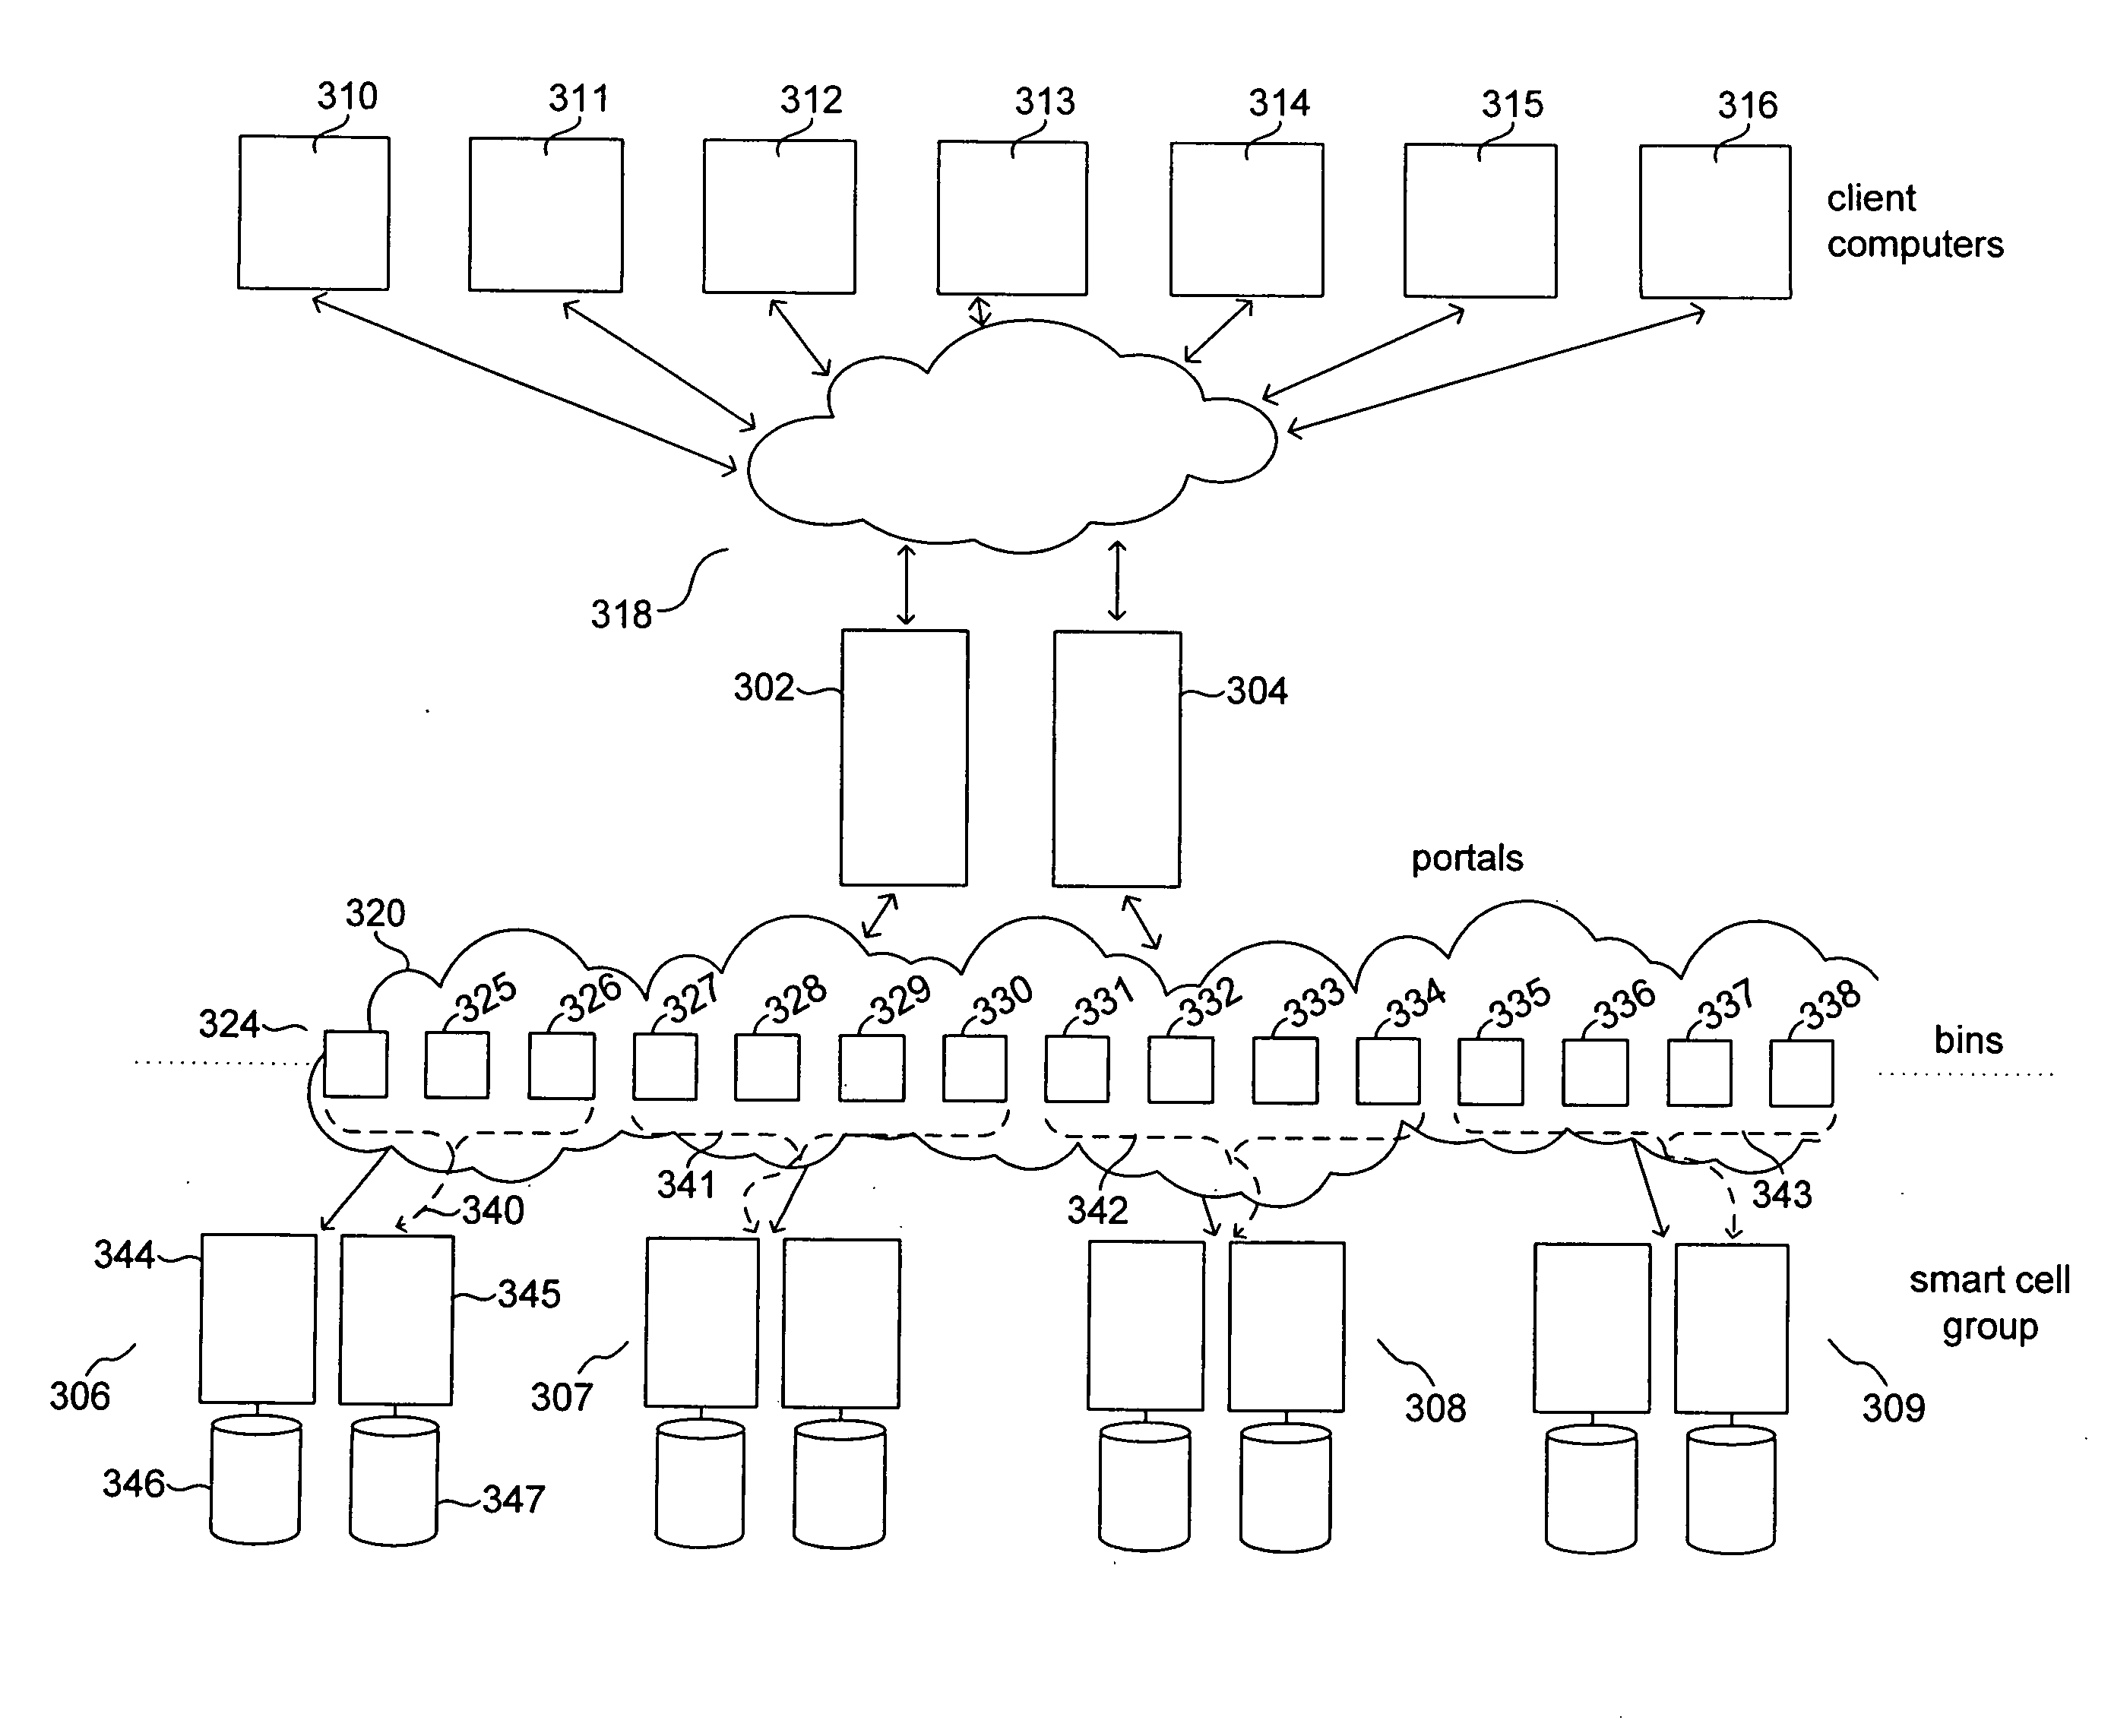 Data-object-related-request routing in a dynamic, distributed data-storage system